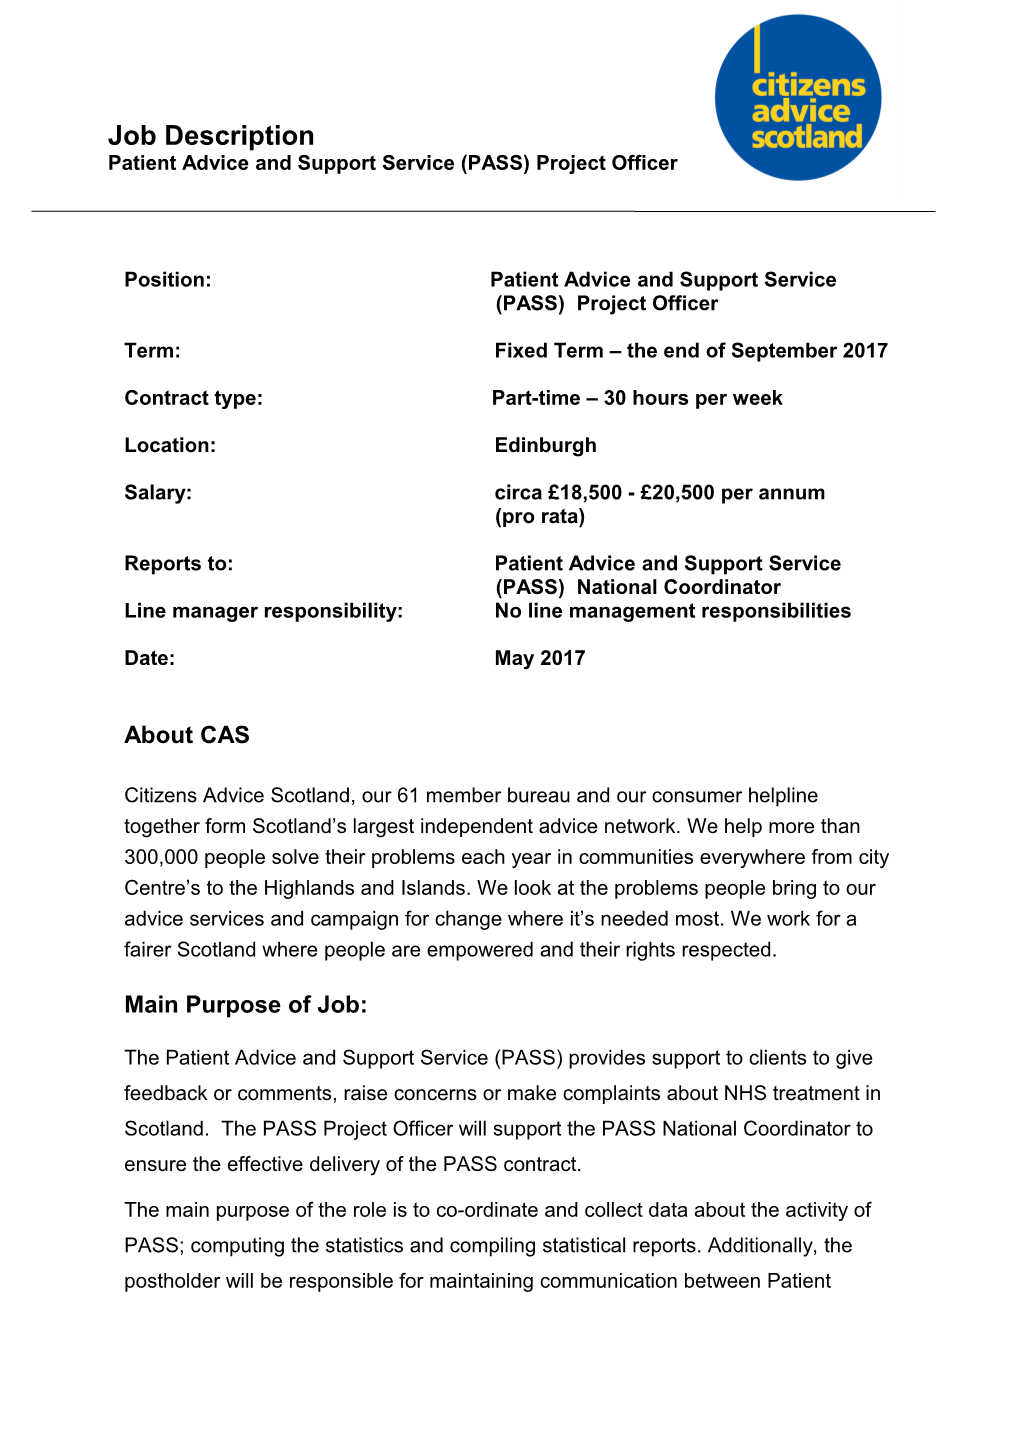 Position: Patient Advice and Support Service